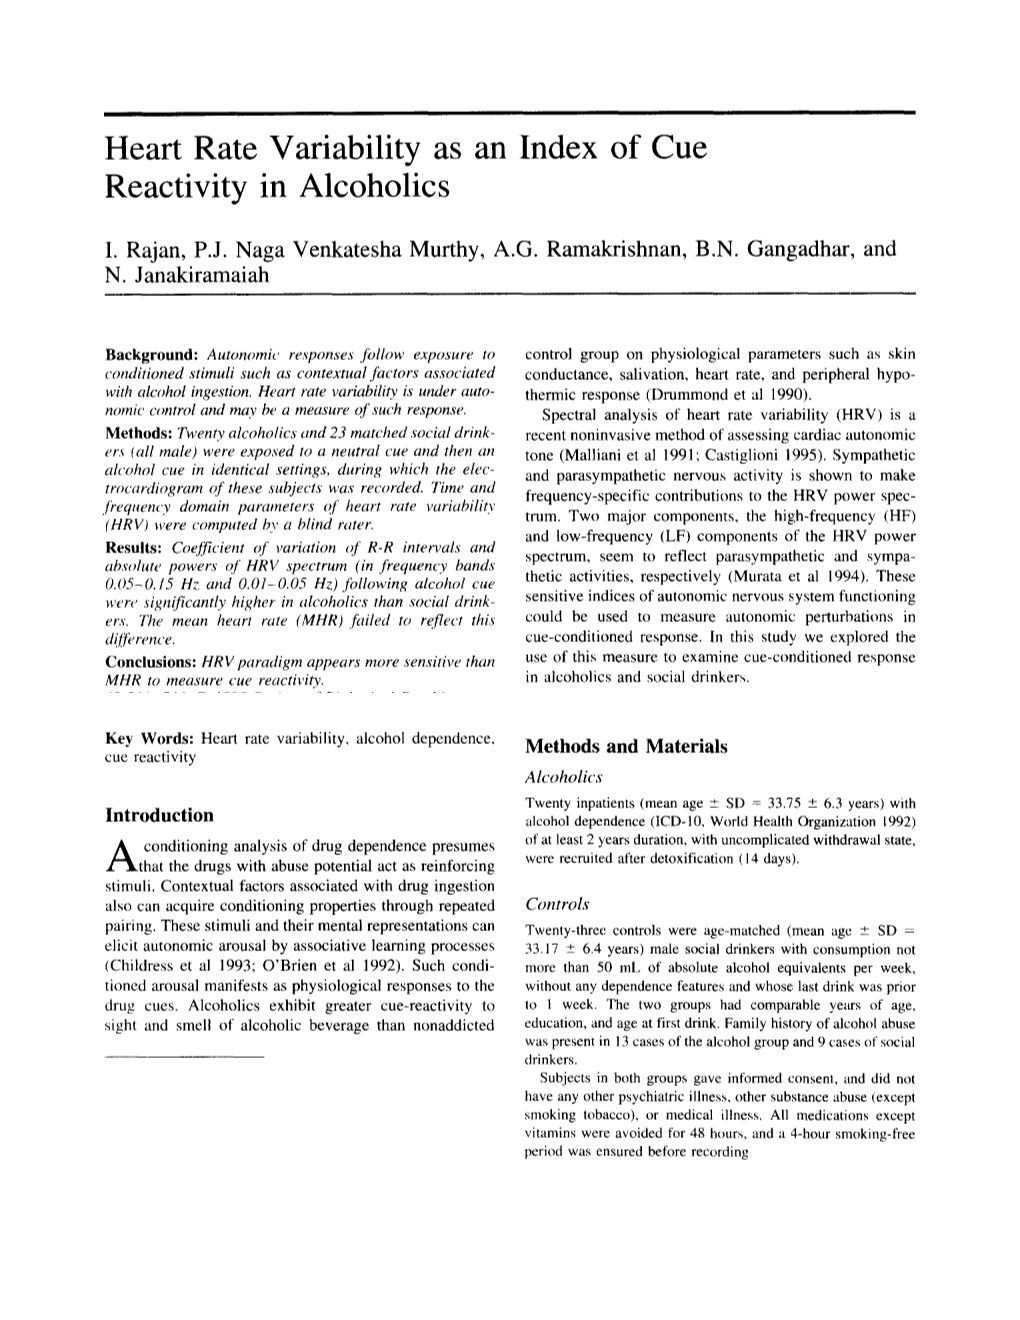 Heart Rate Variability As Reactivity in Alcoholics an Index Of